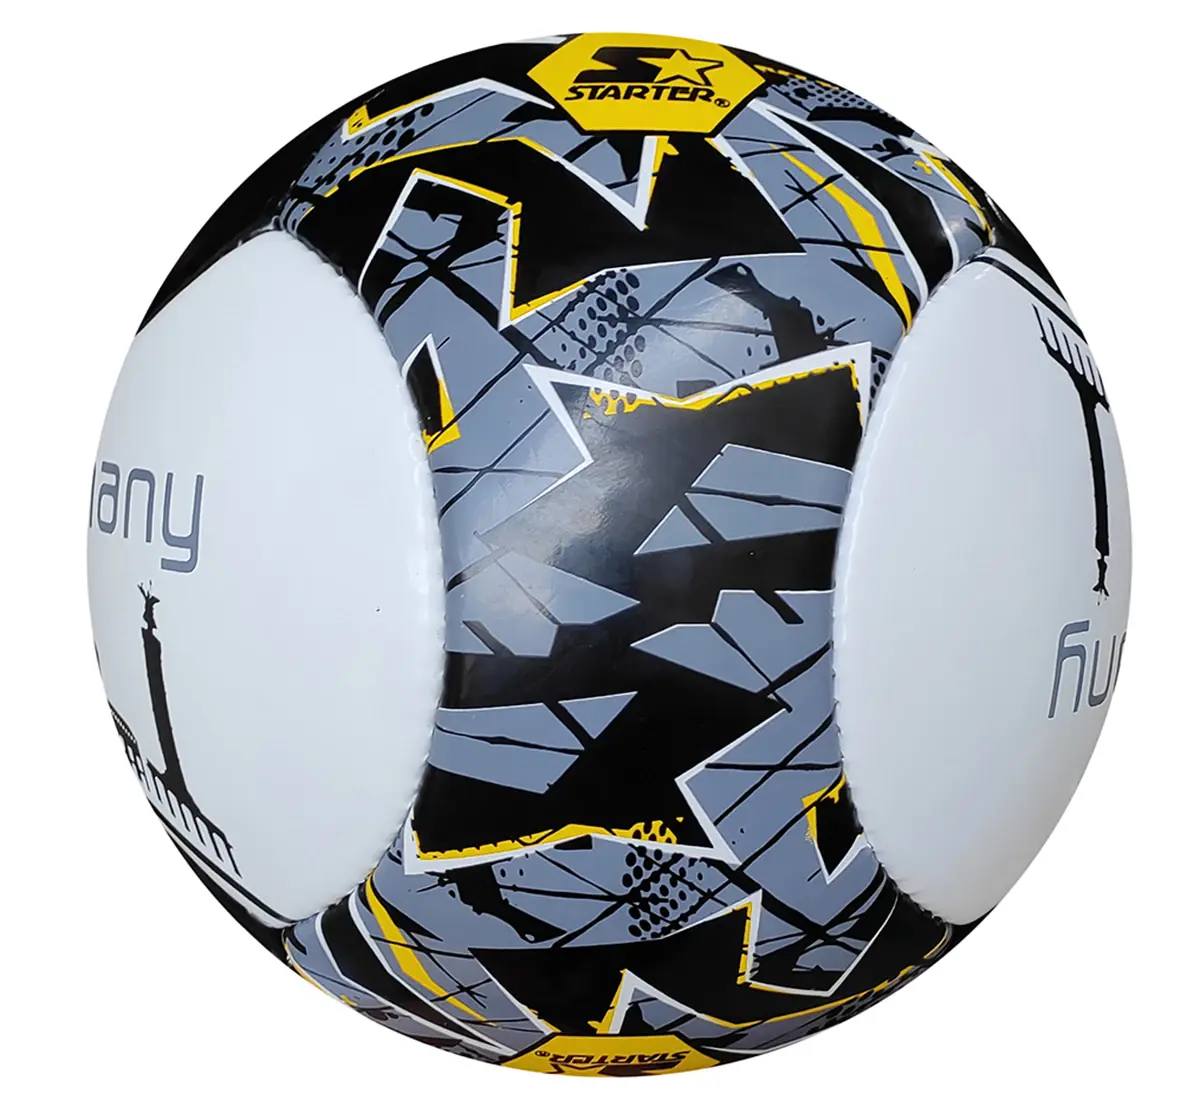 Starter Football Size 5 Germany Multicolor 8Y+